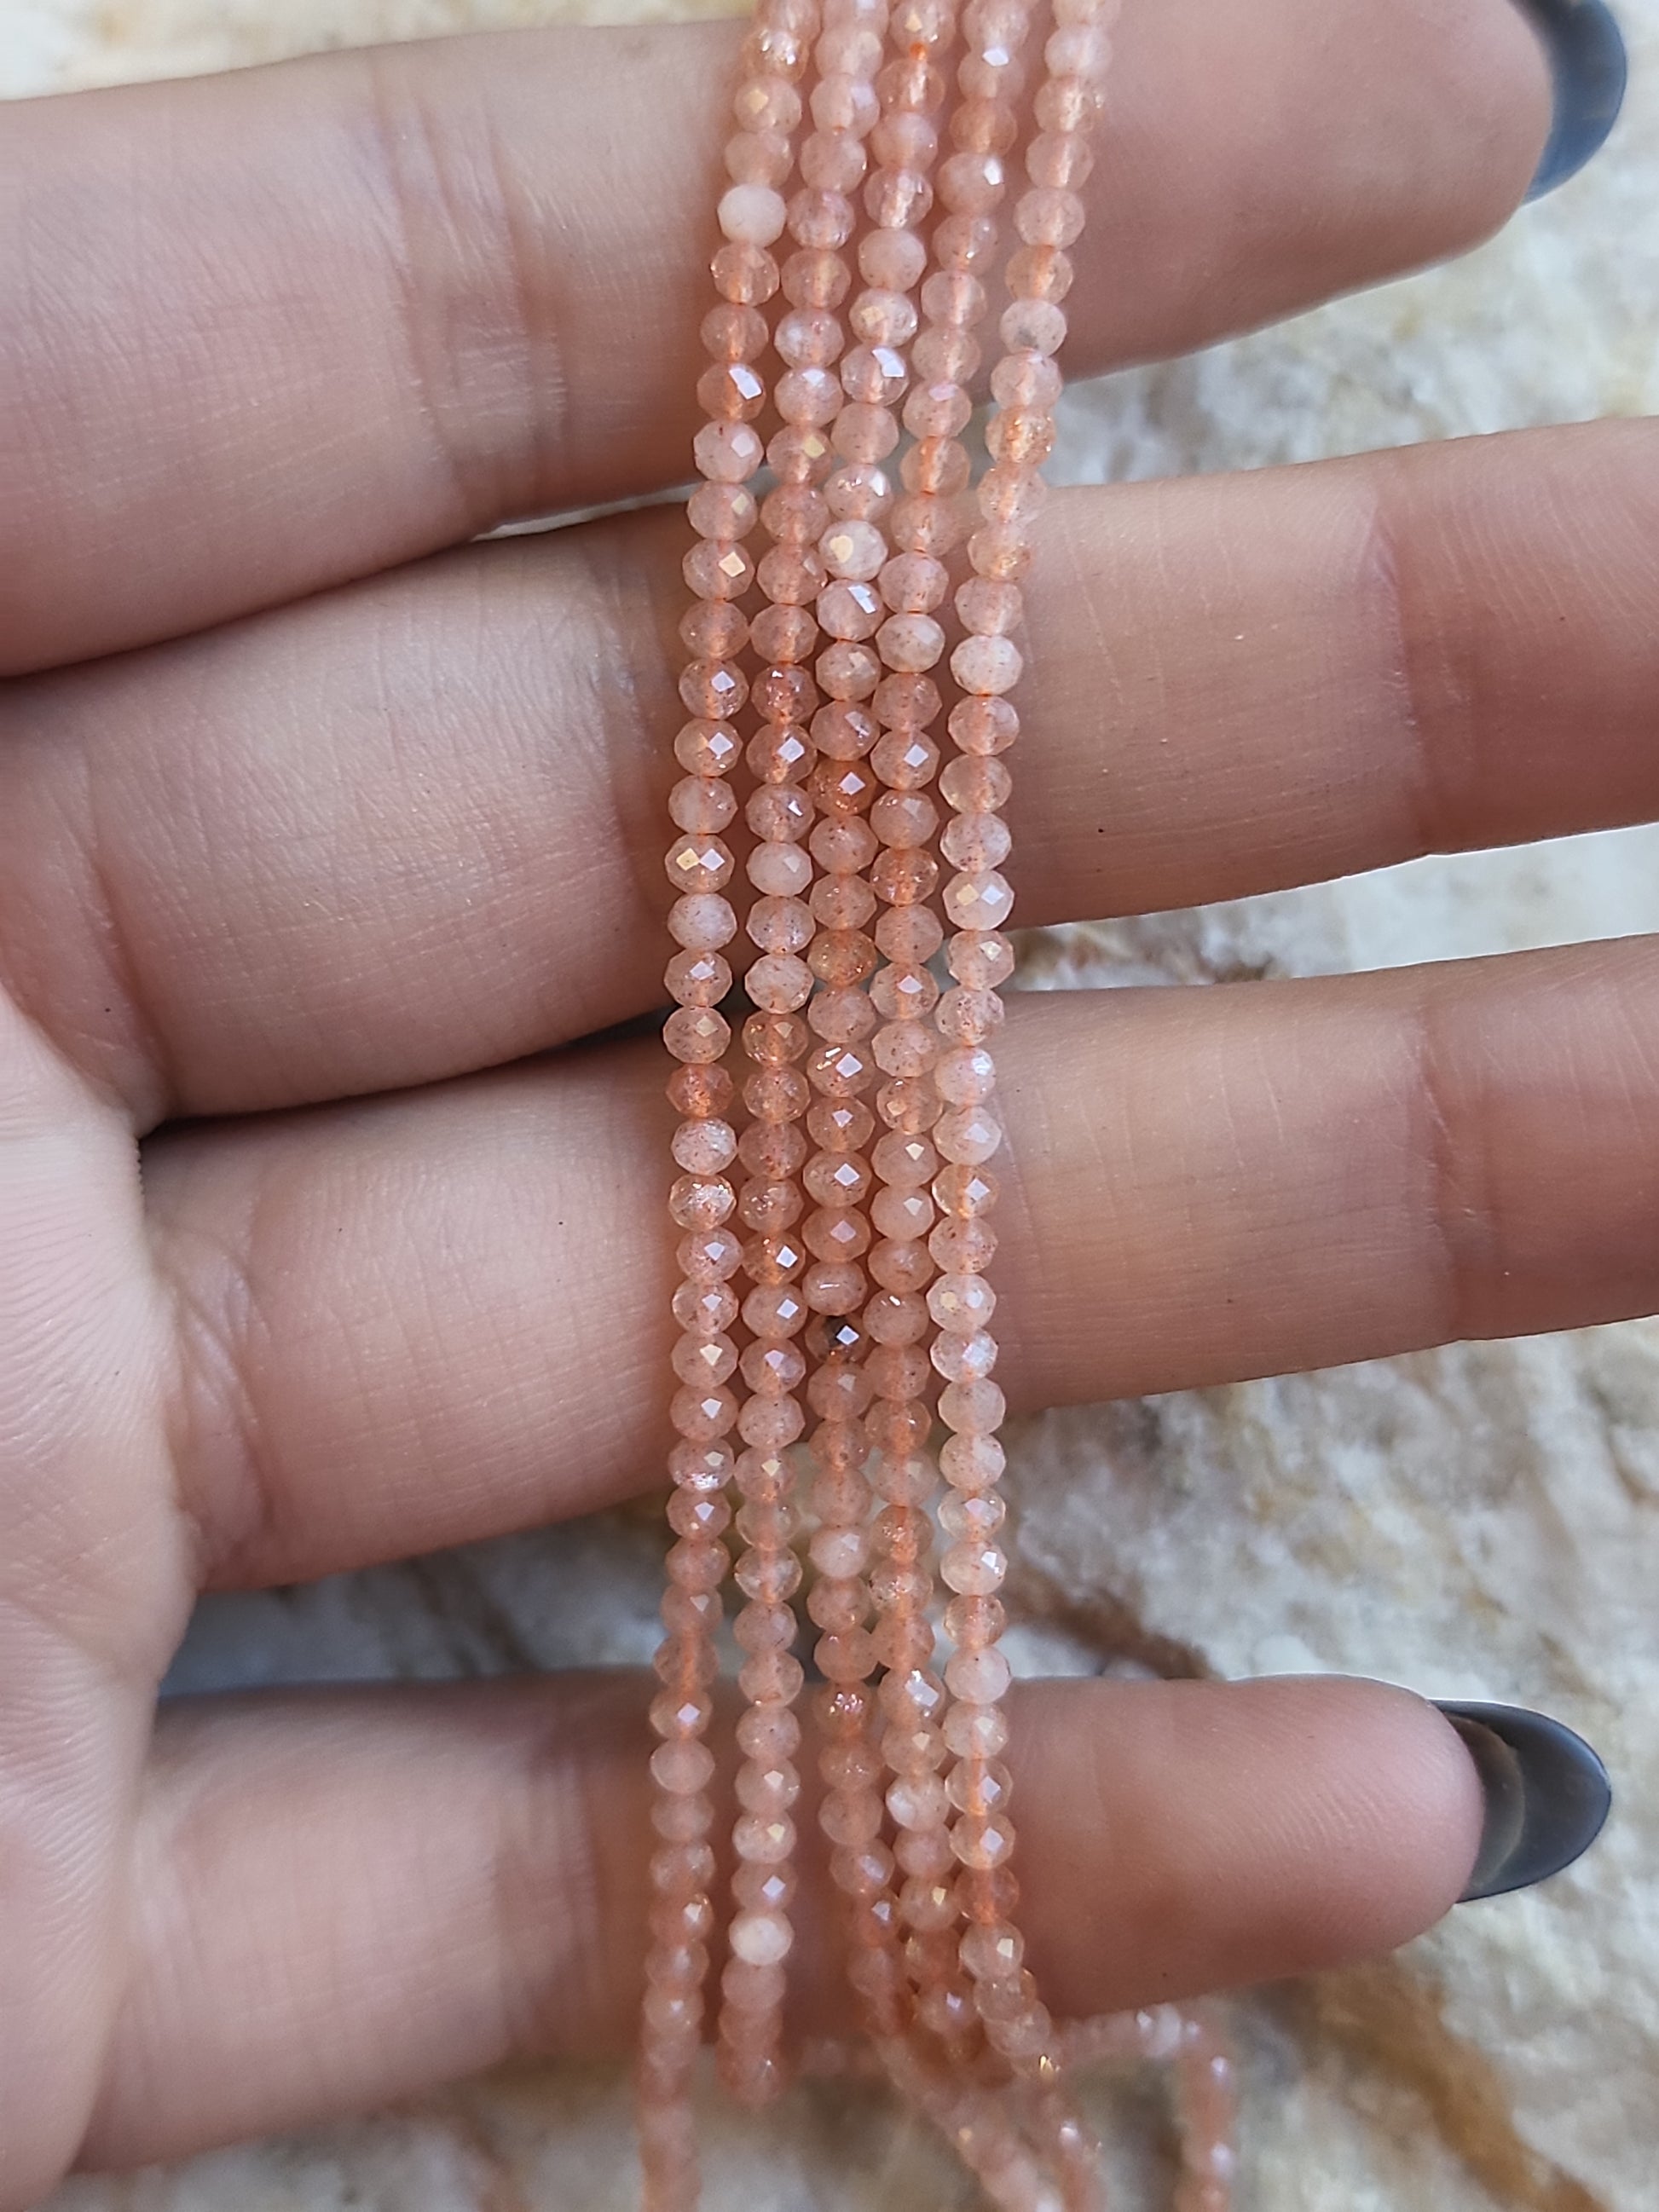 Crafting supplies such as faceted sunstone rondelle beads available at wholesale and retail prices, only at our crystal shop in San Diego!